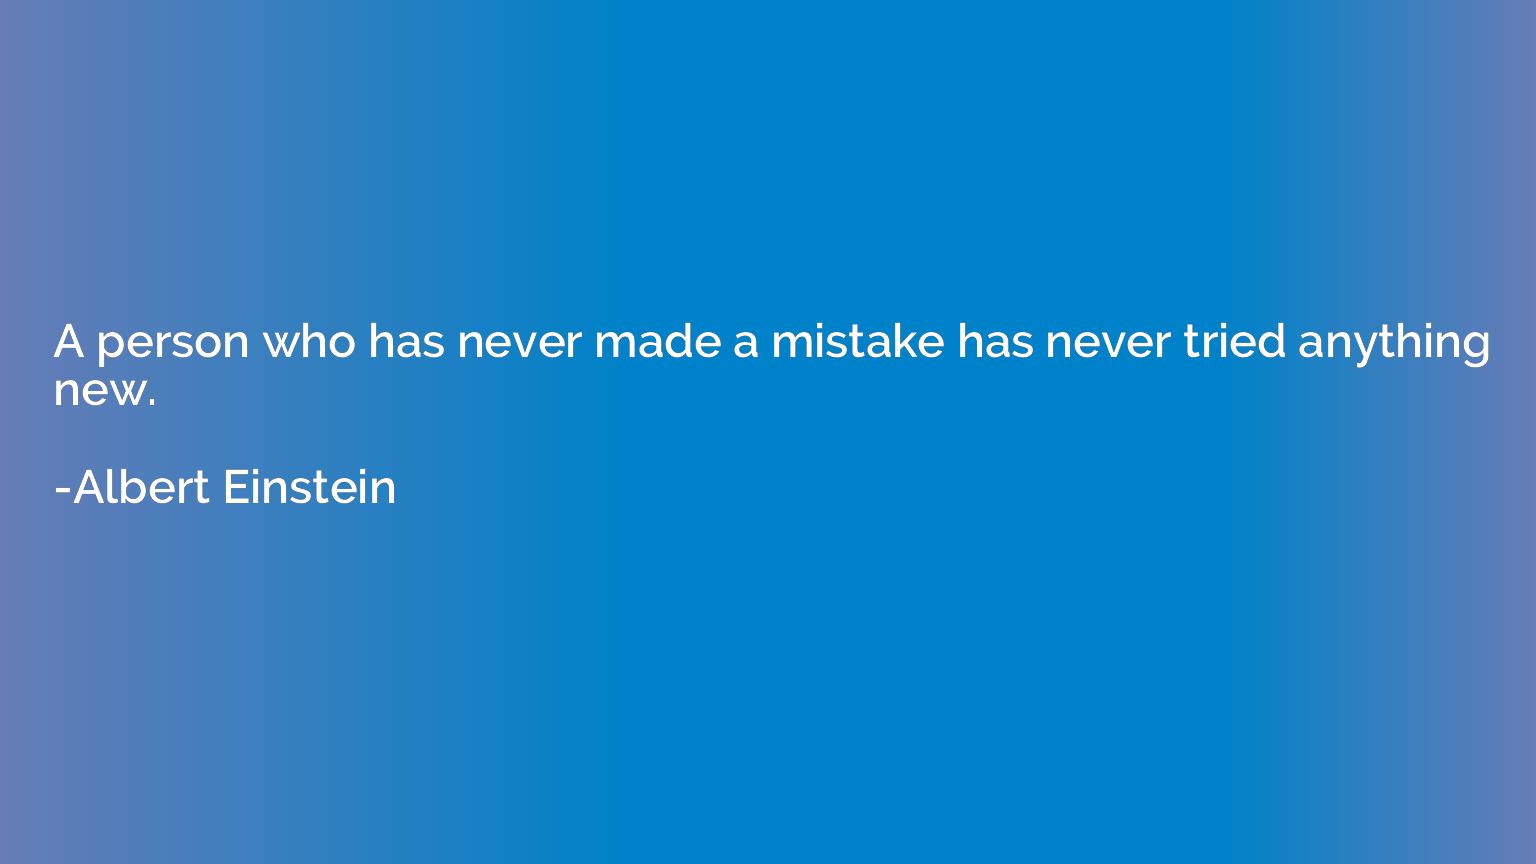 A person who has never made a mistake has never tried anythi